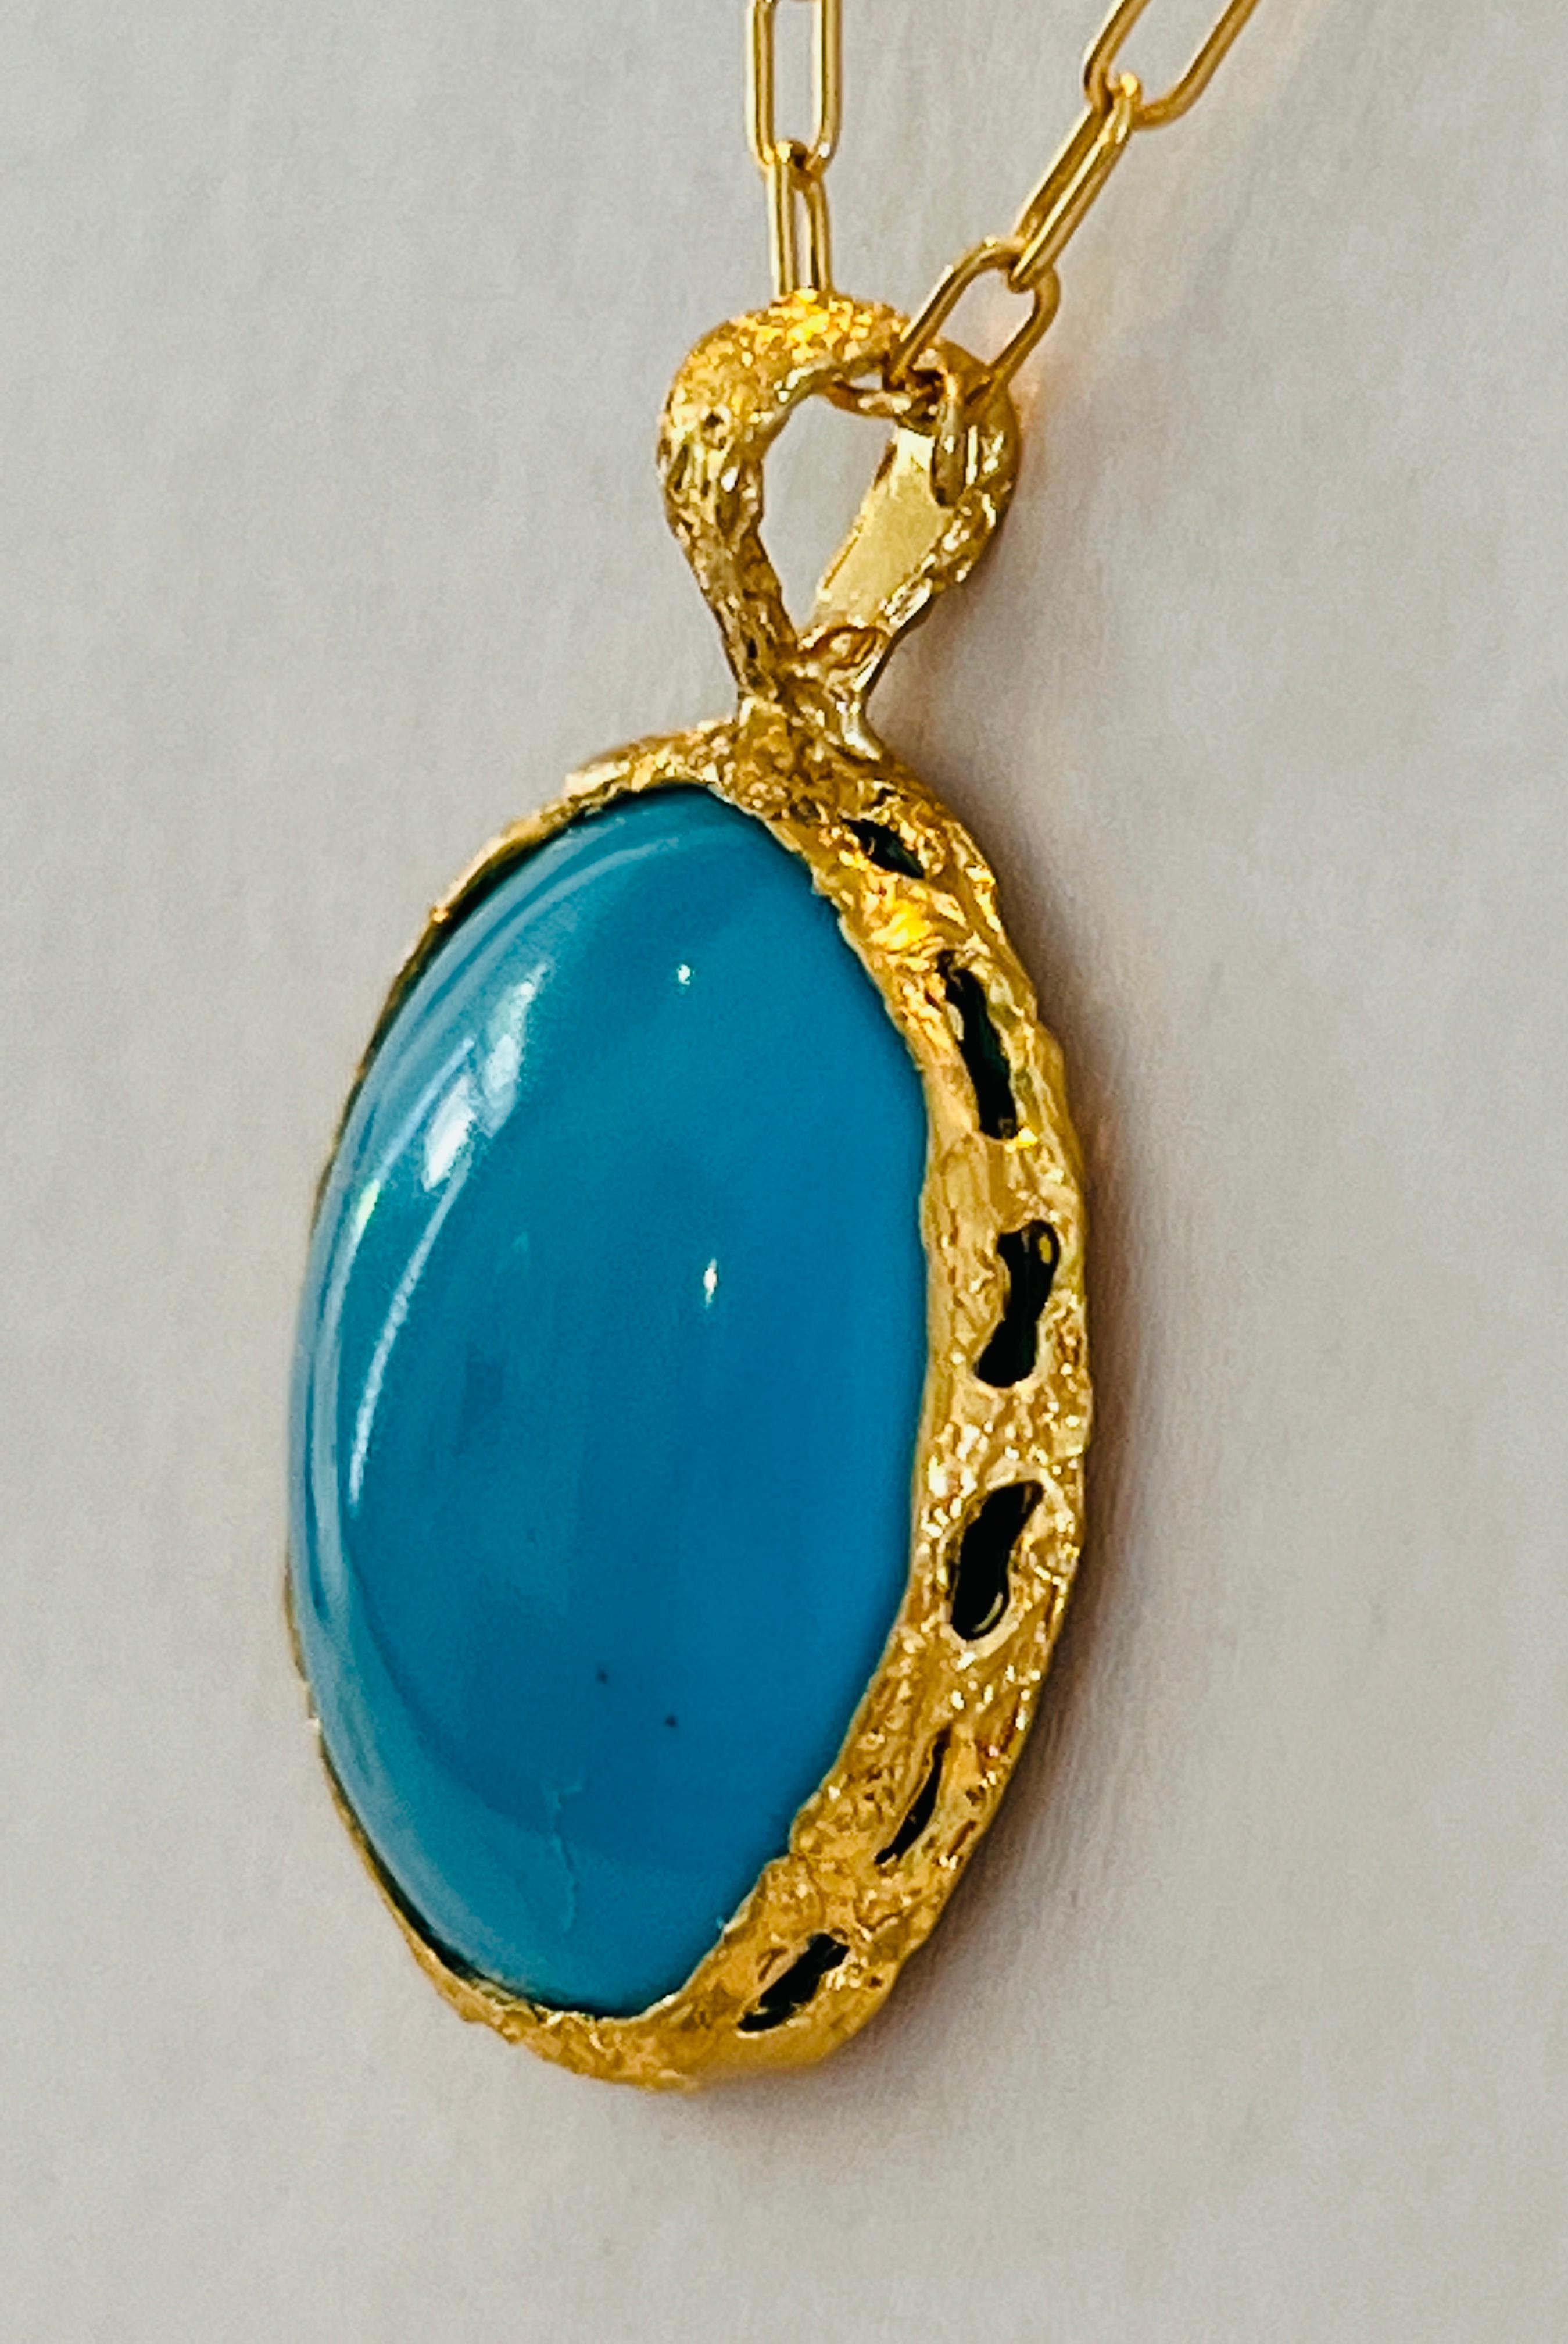 Round Cut Turquoise Handmade Pendant in 22k Gold, by Tagili